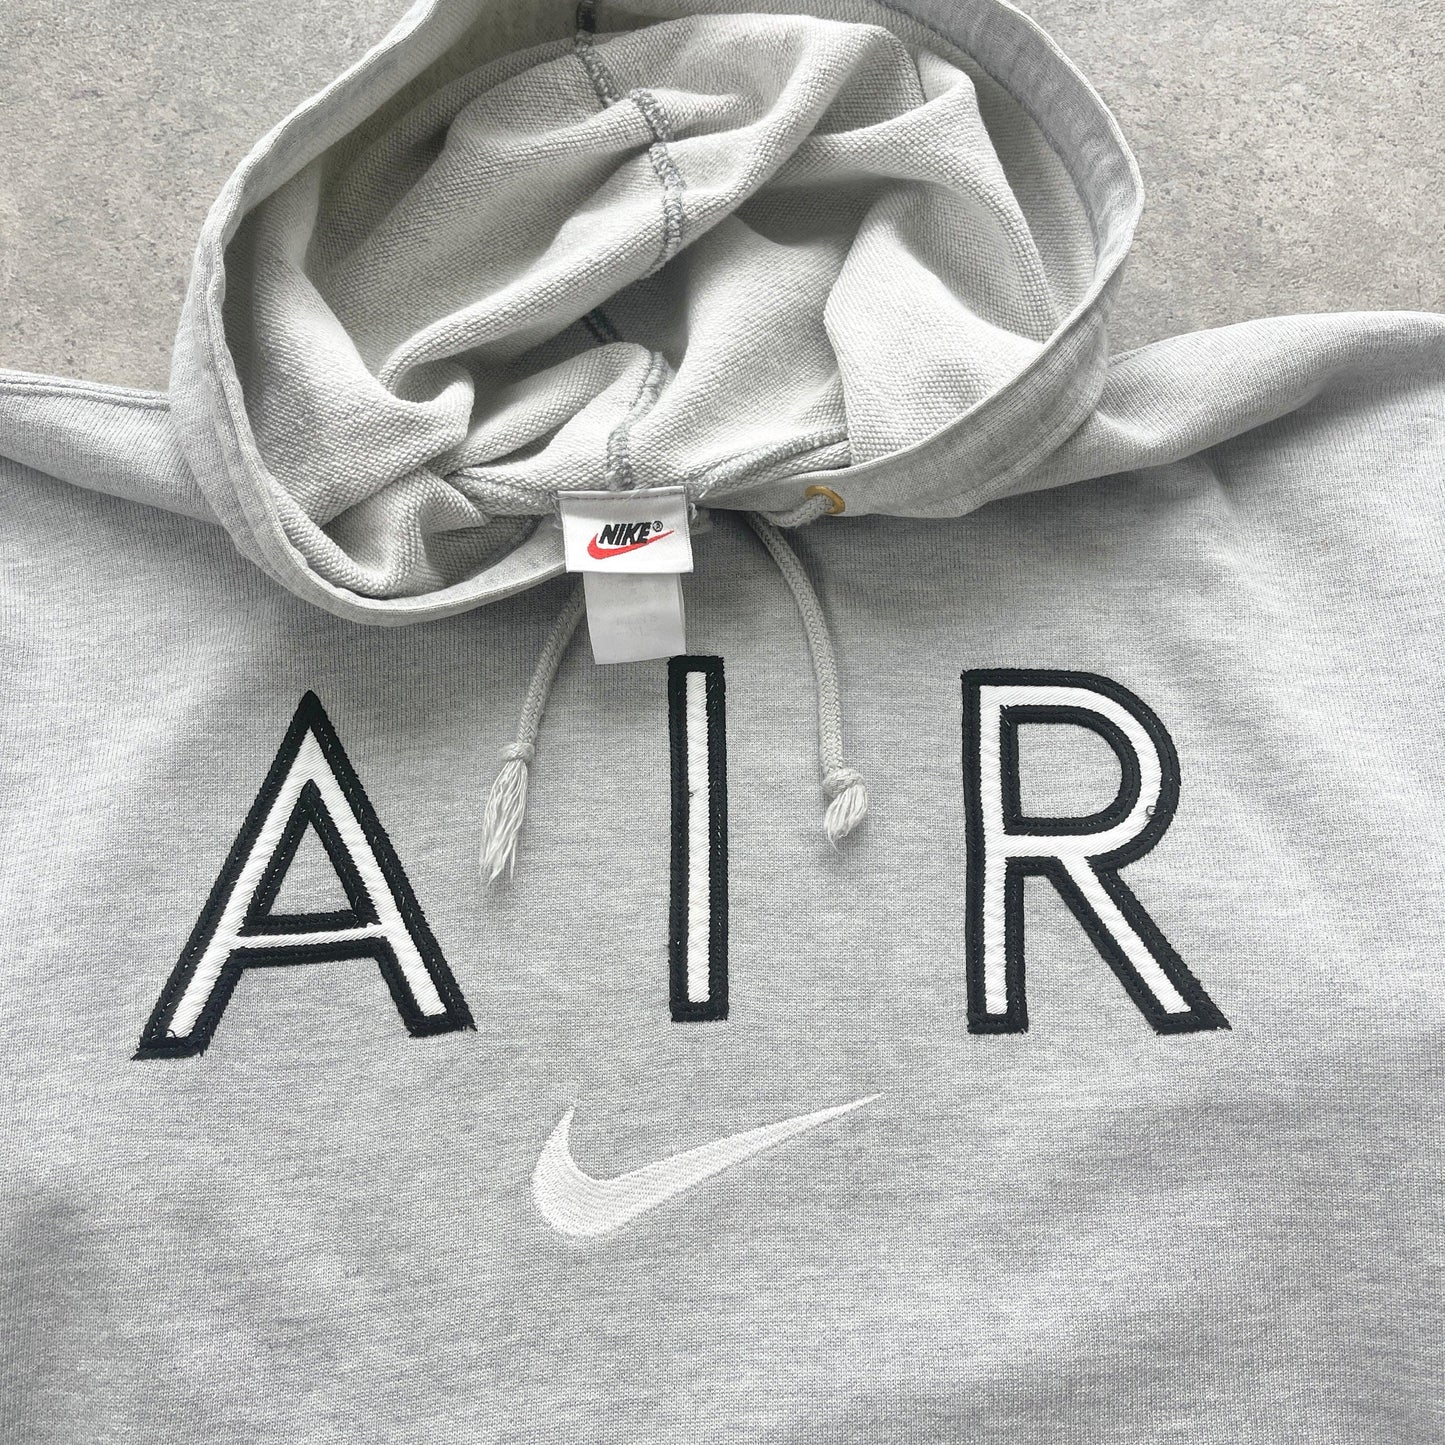 Nike Air RARE 1990s heavyweight embroidered hoodie (M) - Known Source